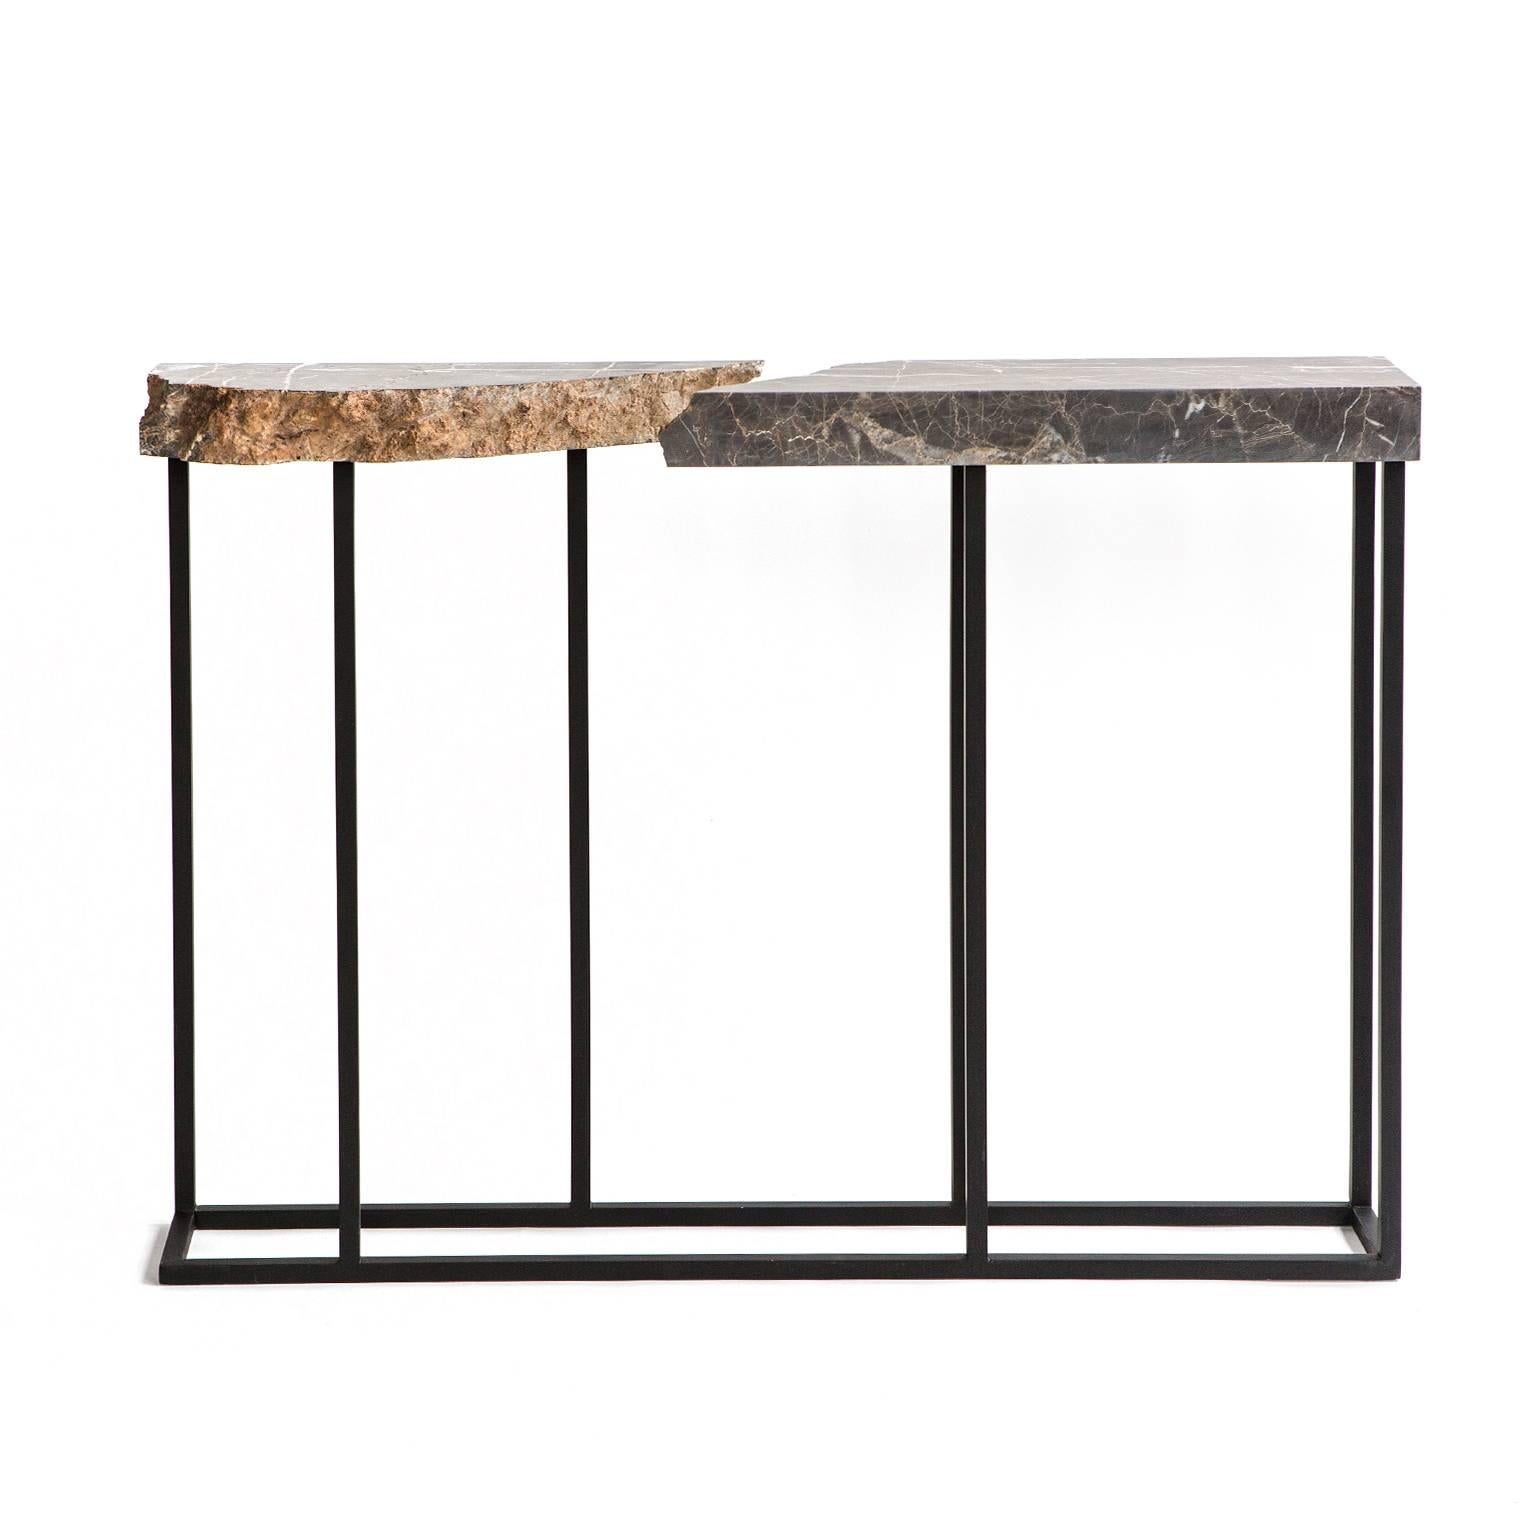 This unique console table is a part of the FOUND collection of one-of-a-kind functional art pieces. A hand-picked 2.75